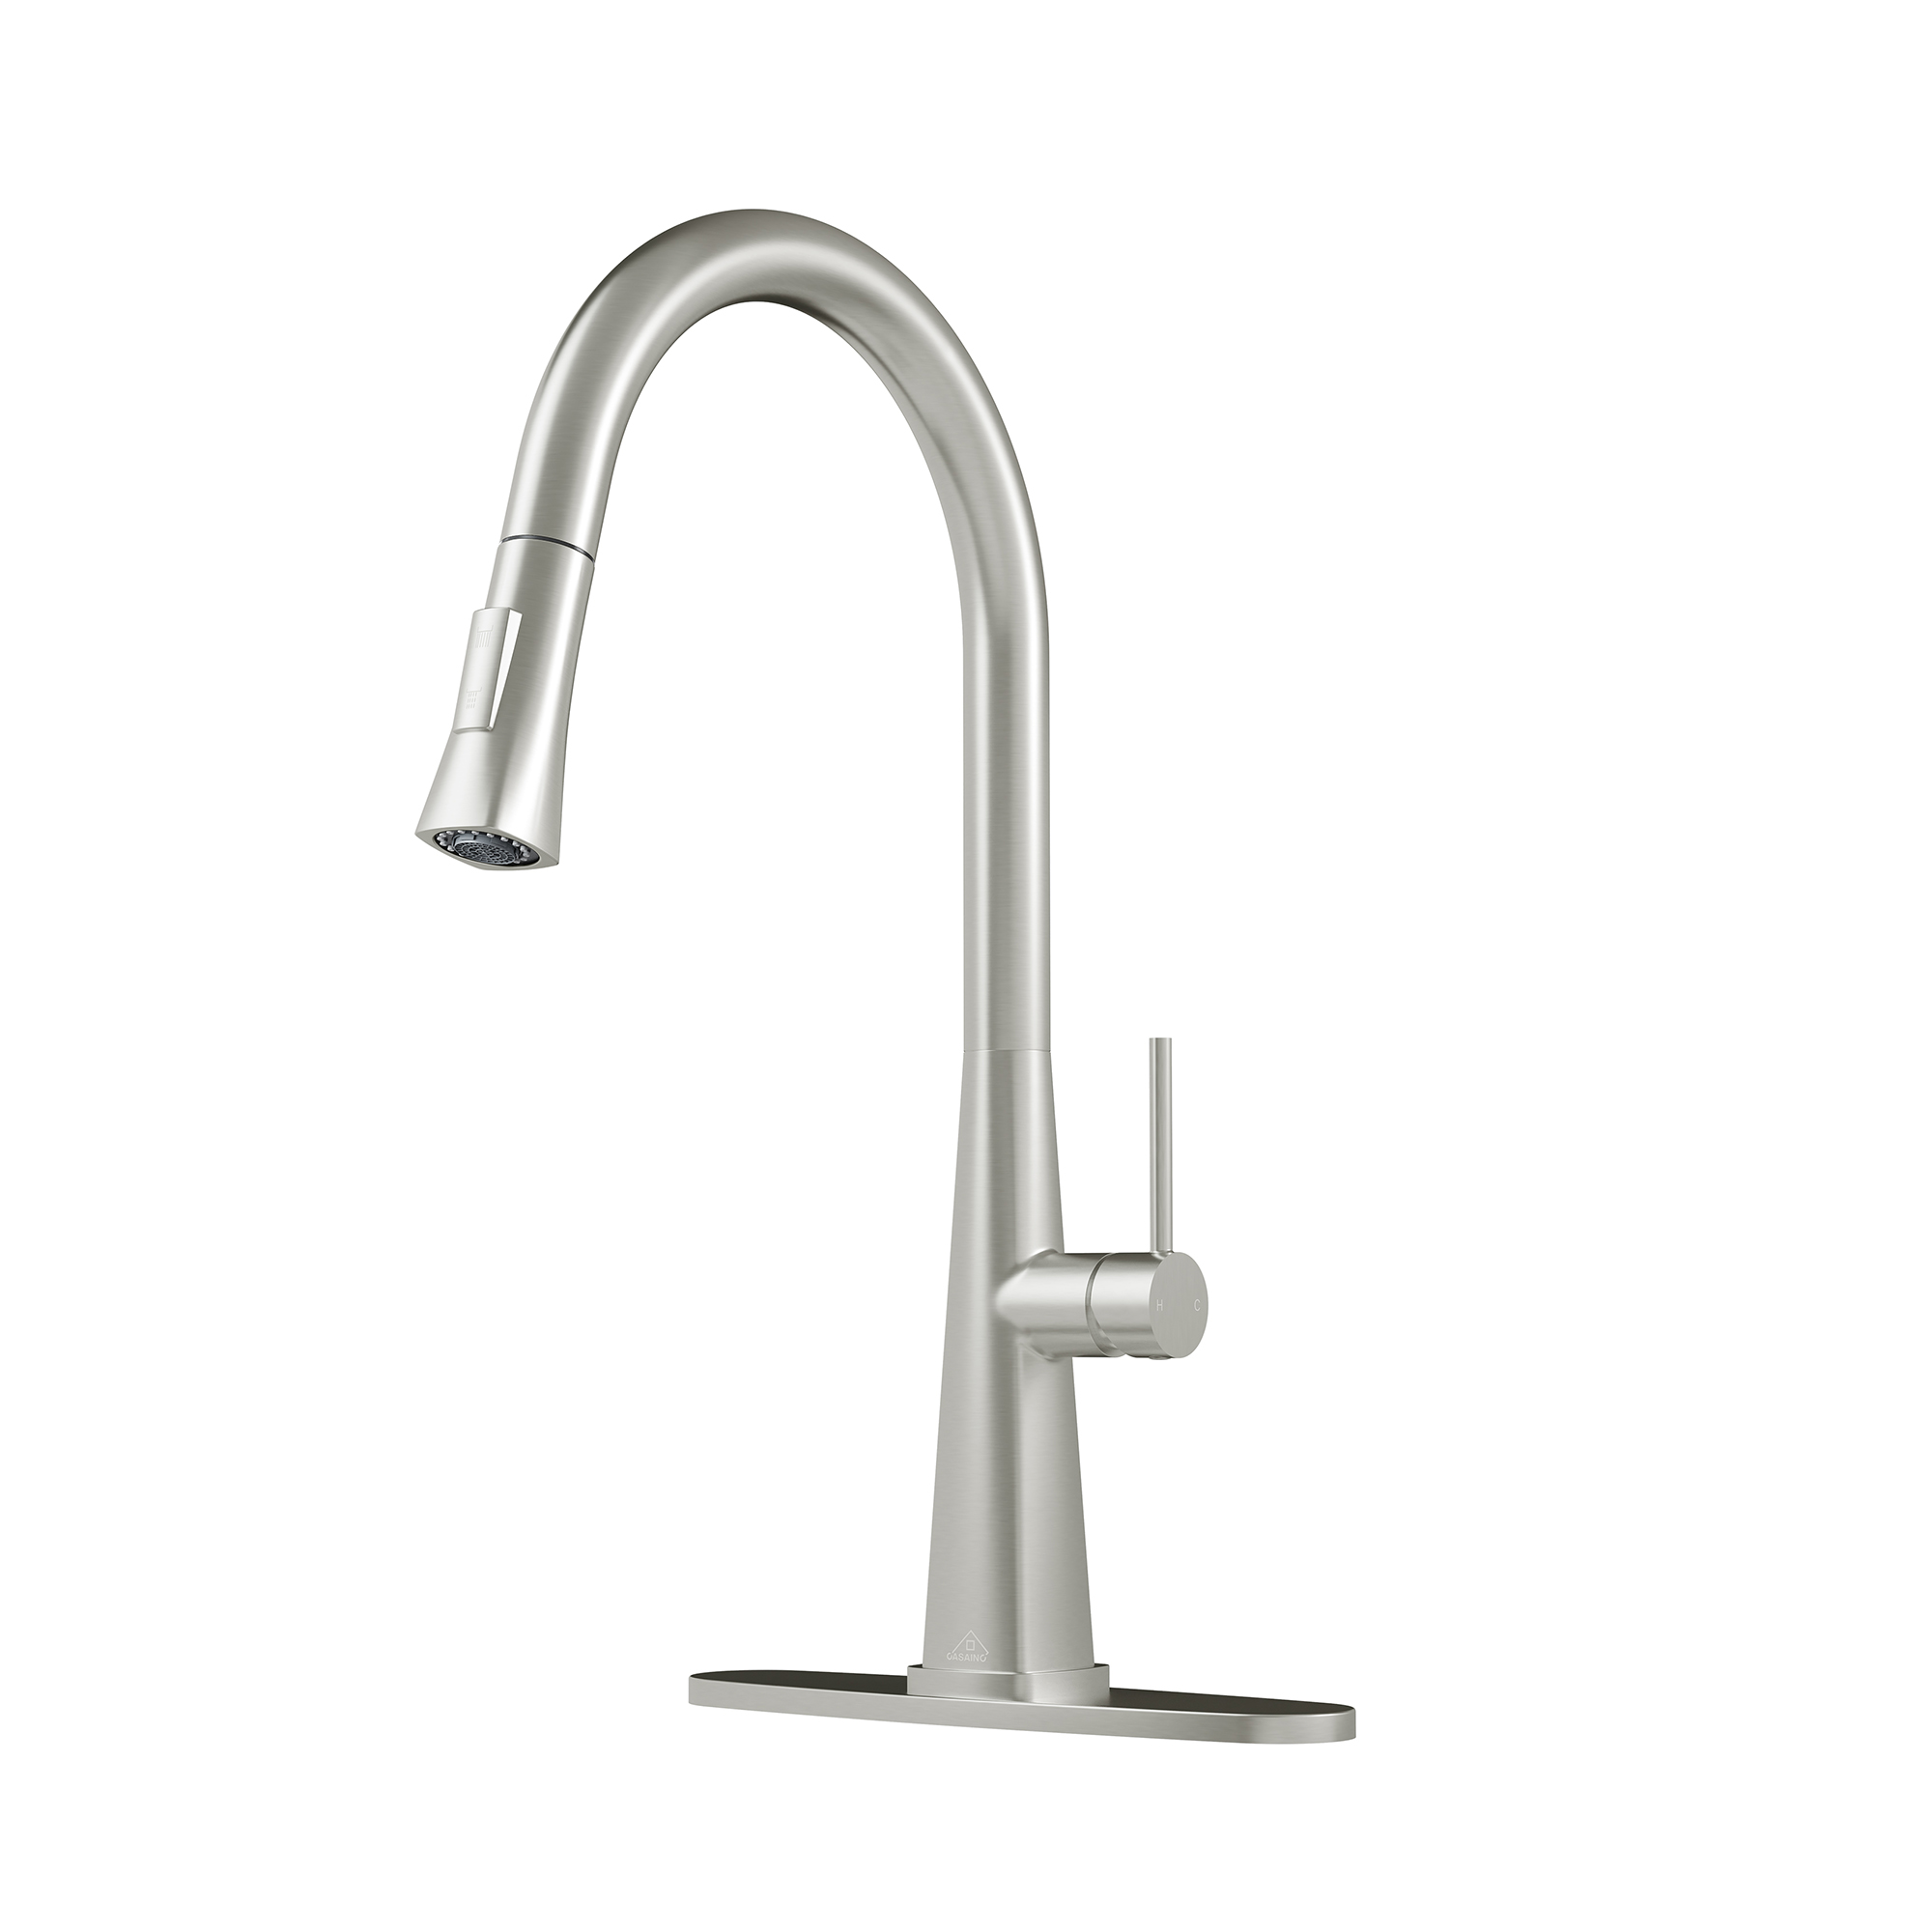 CASAINC Single-Handle Pull-Out Kitchen Faucet in Brushed Nickel